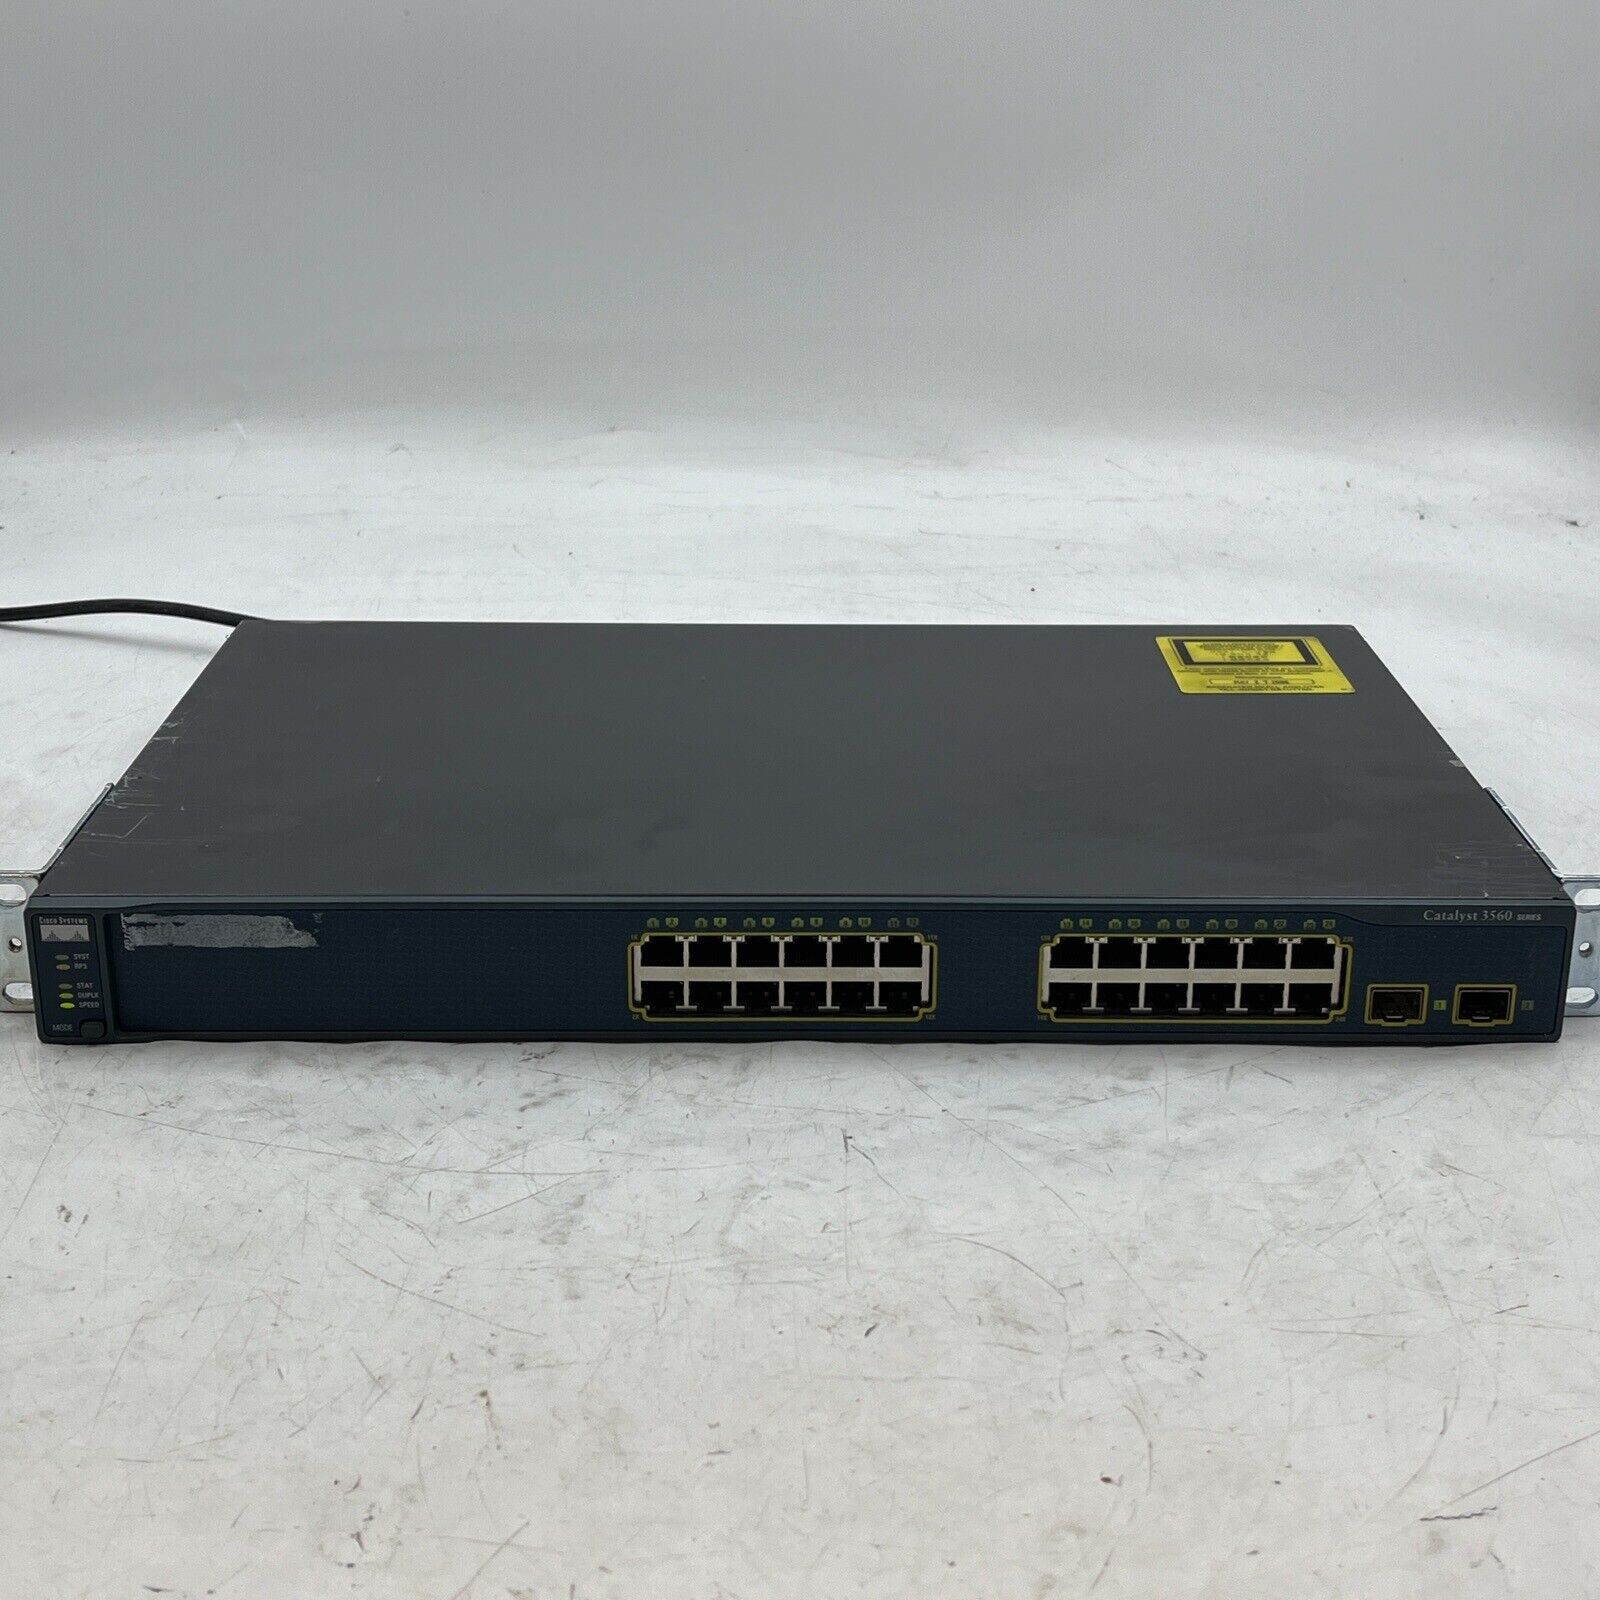 Cisco WS-C3560-24TS-S Catalyst 3560 24-Port 10/100 Fast Ethernet Network Switch 